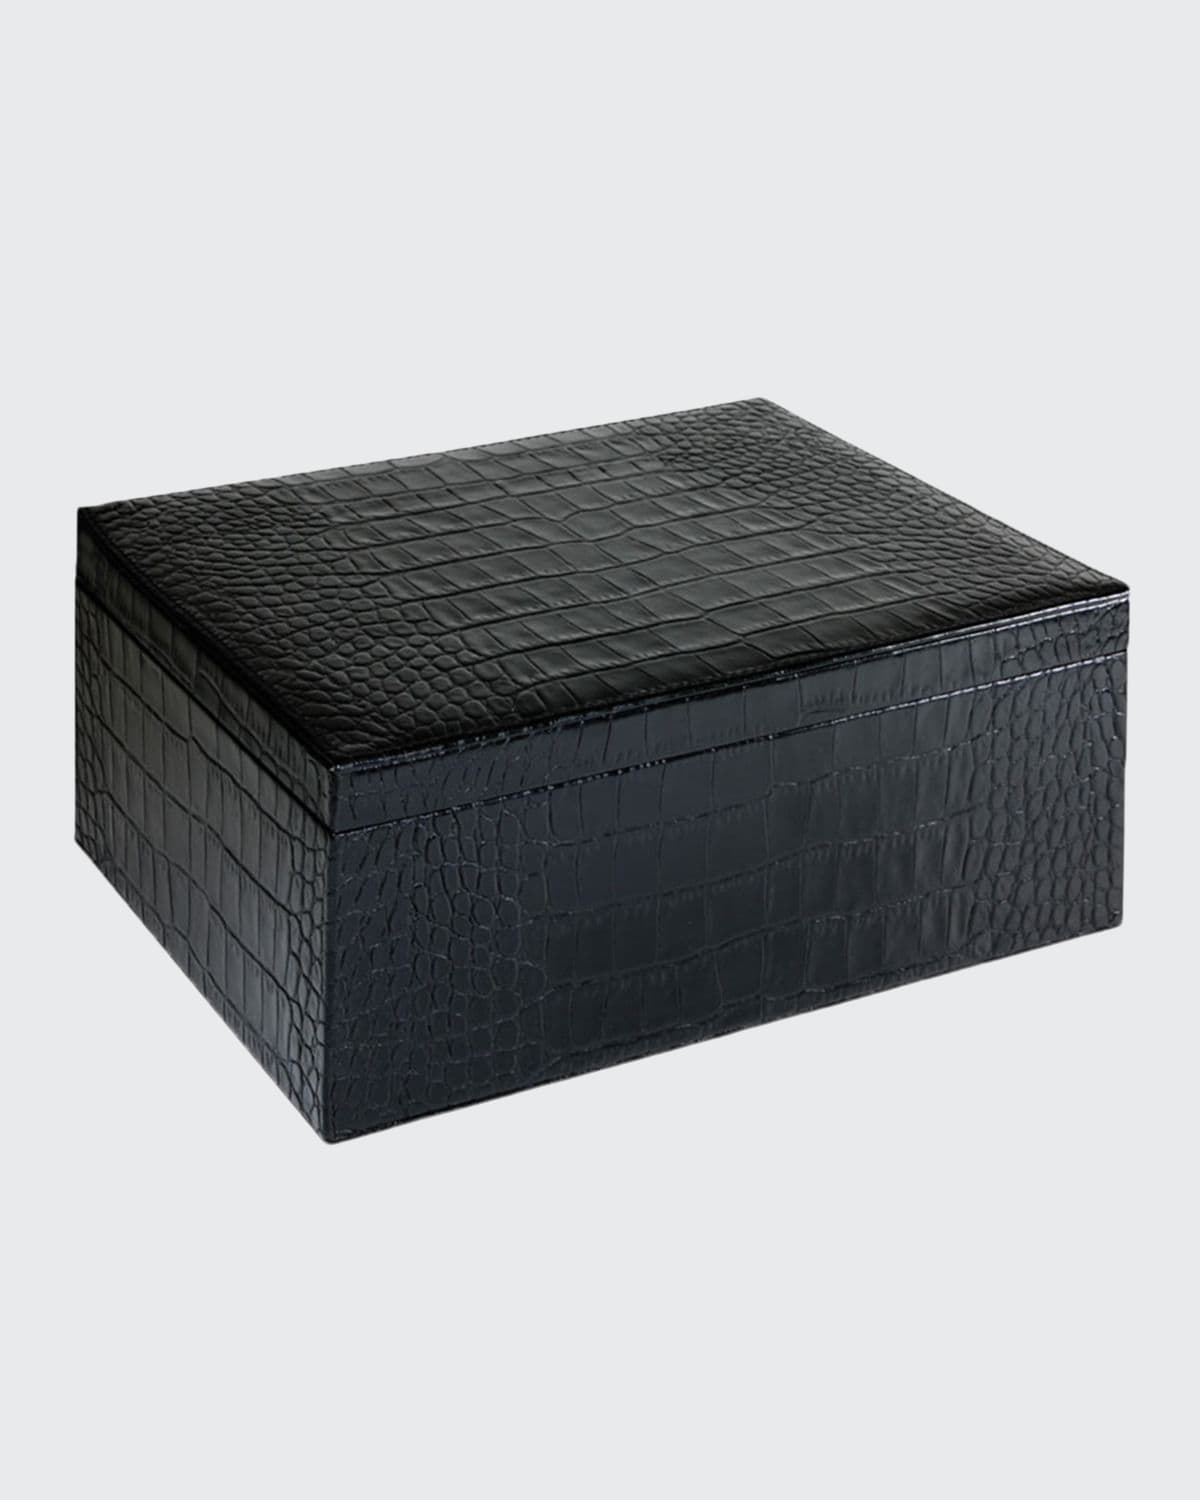 Graphic Image Large Box In Black